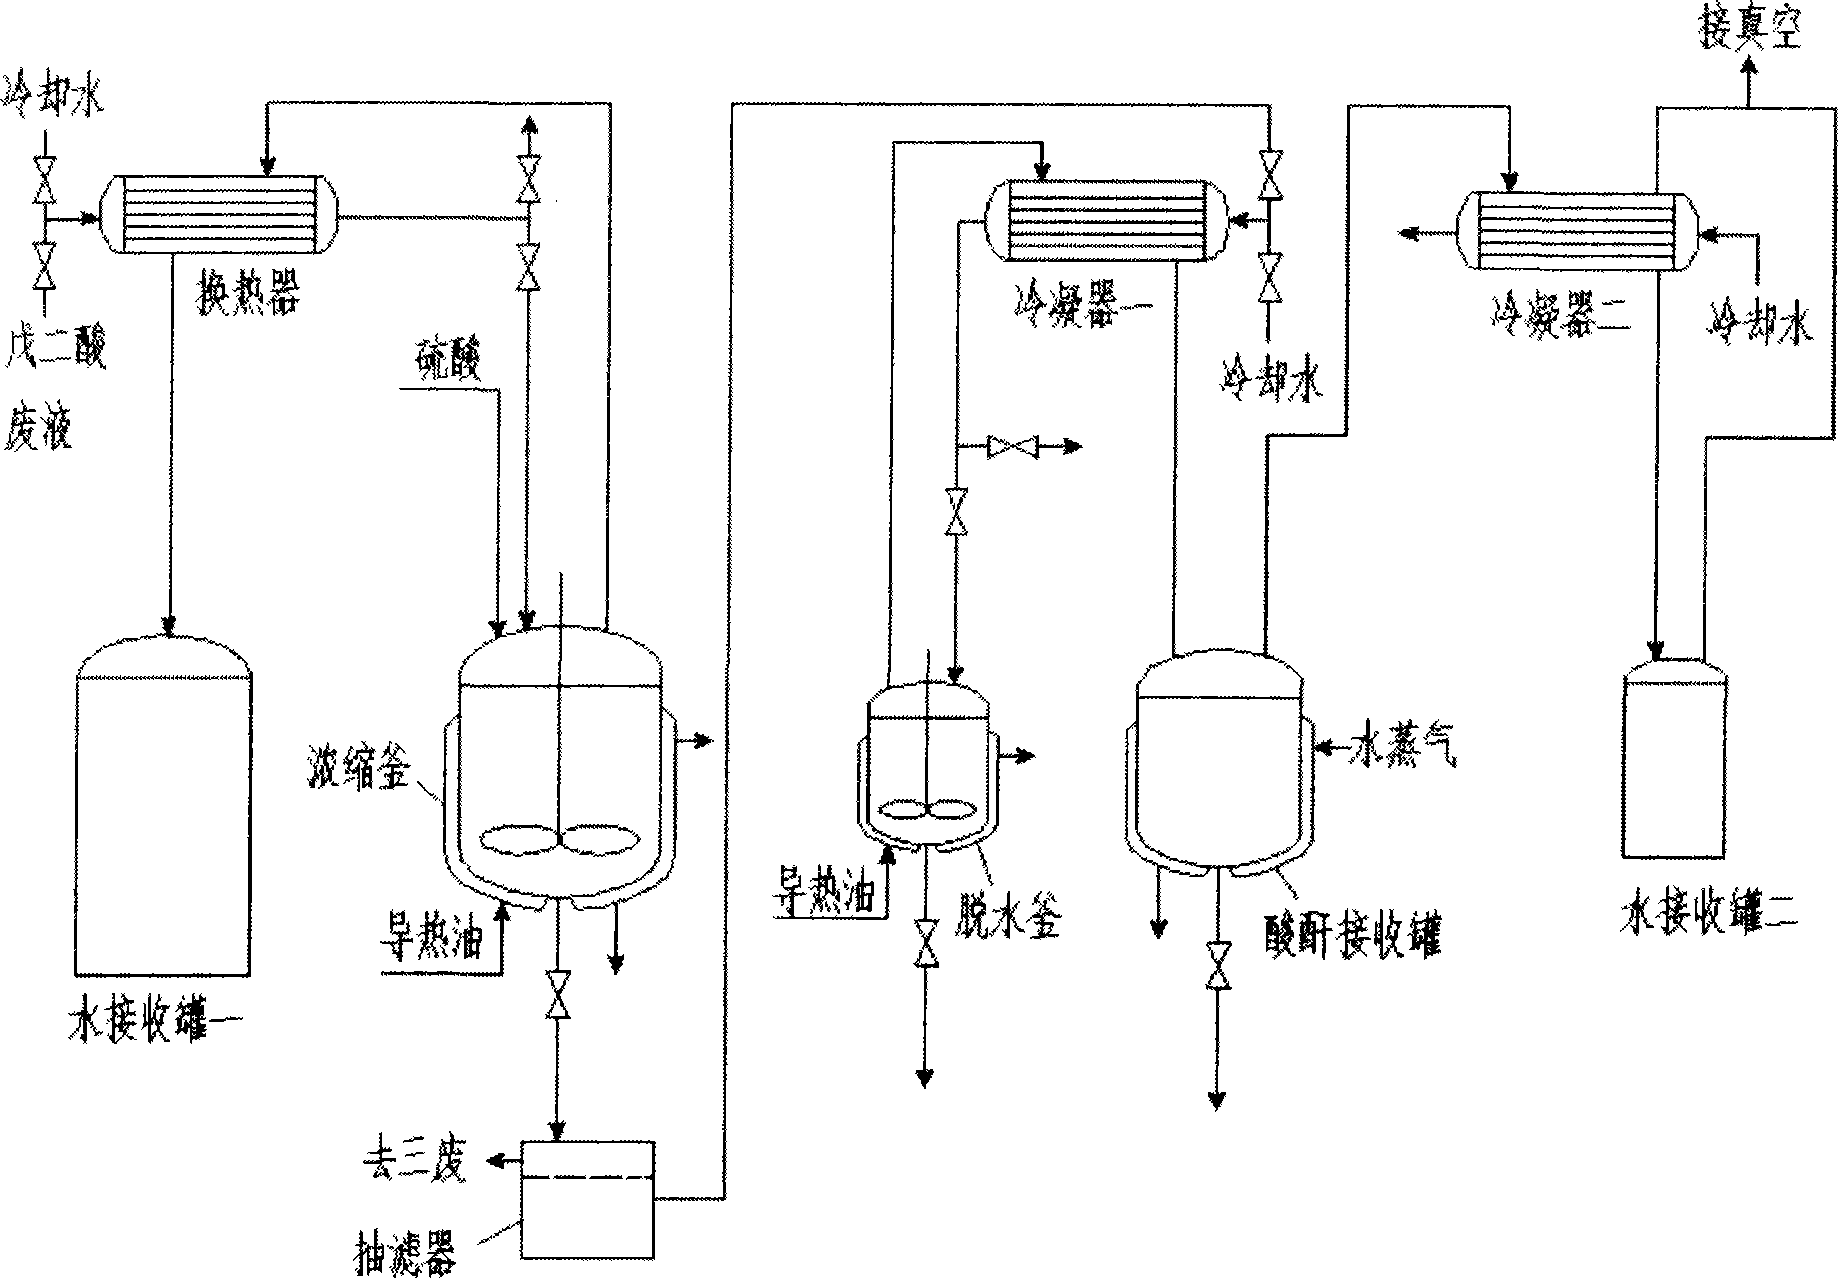 Method for recovering glutaric acid by-products produced in enzymic method prepared 7-aminocephalosporin acid process